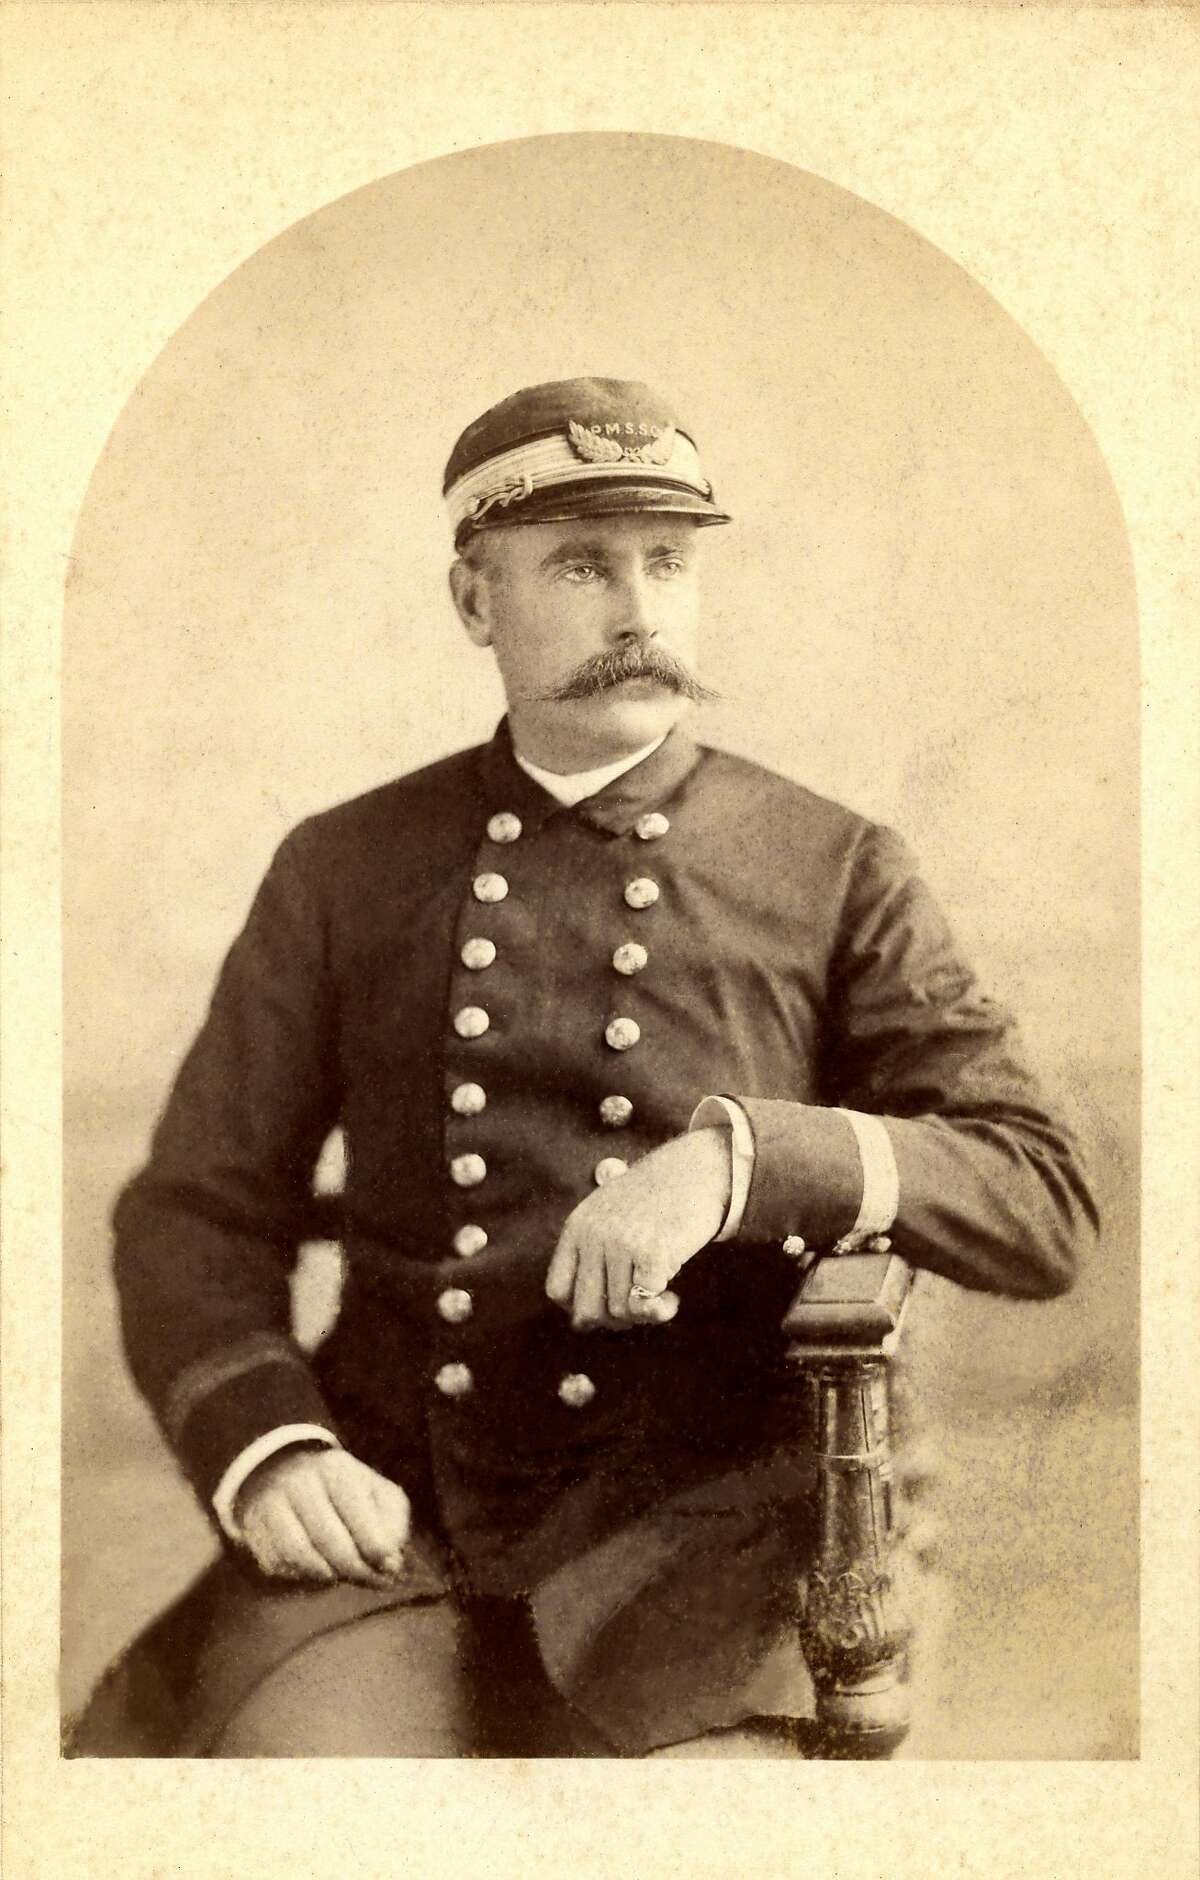 Captain William Ward, master of the SS City of Rio de Janeiro at the time of the loss.